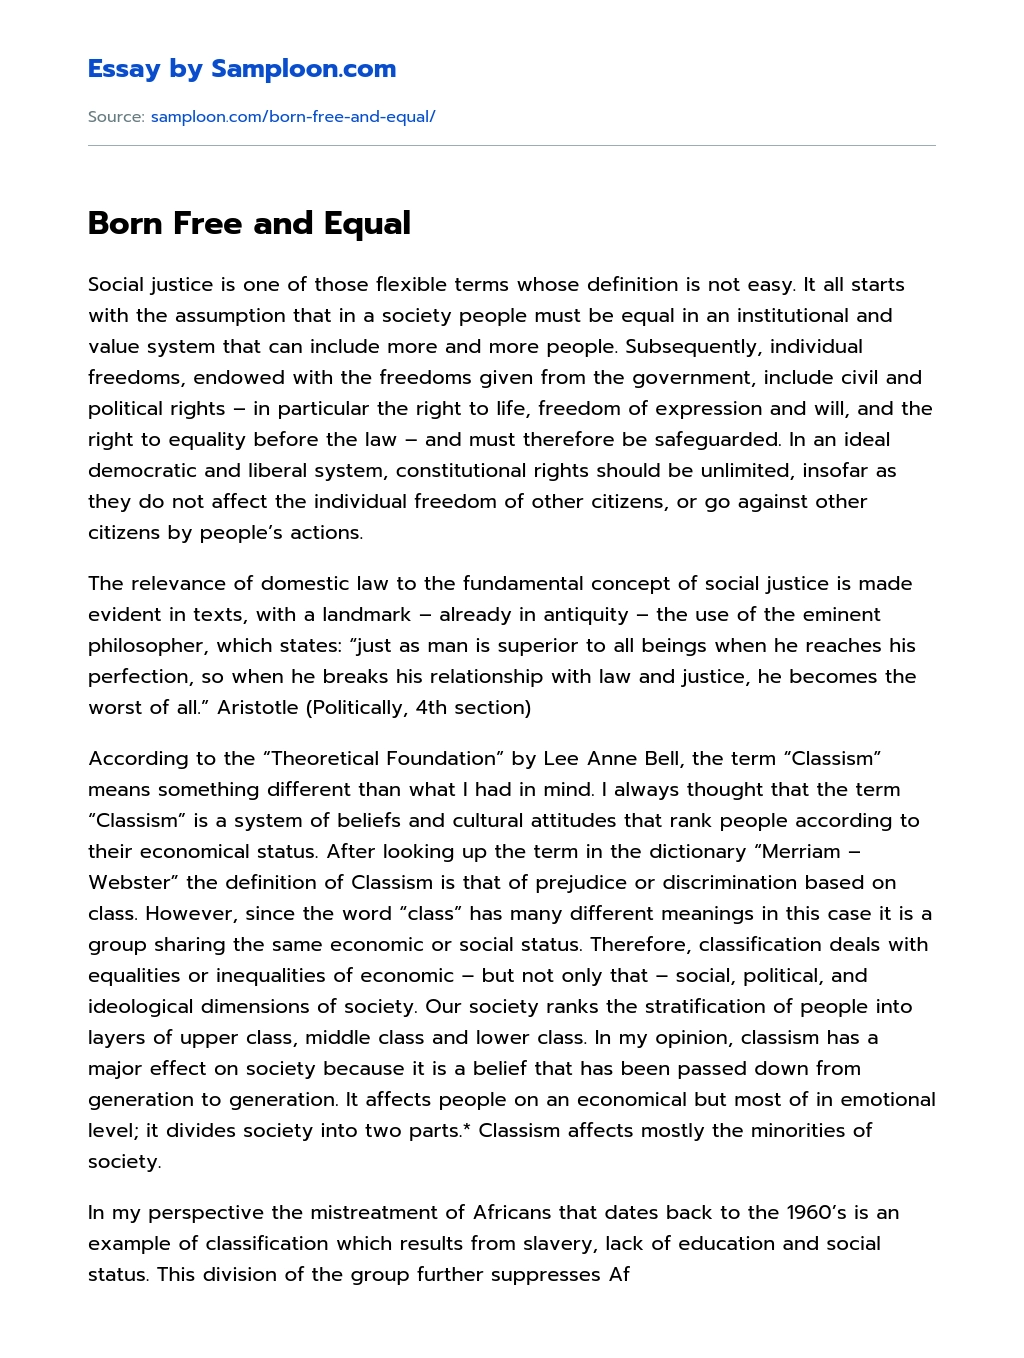 Born Free and Equal essay